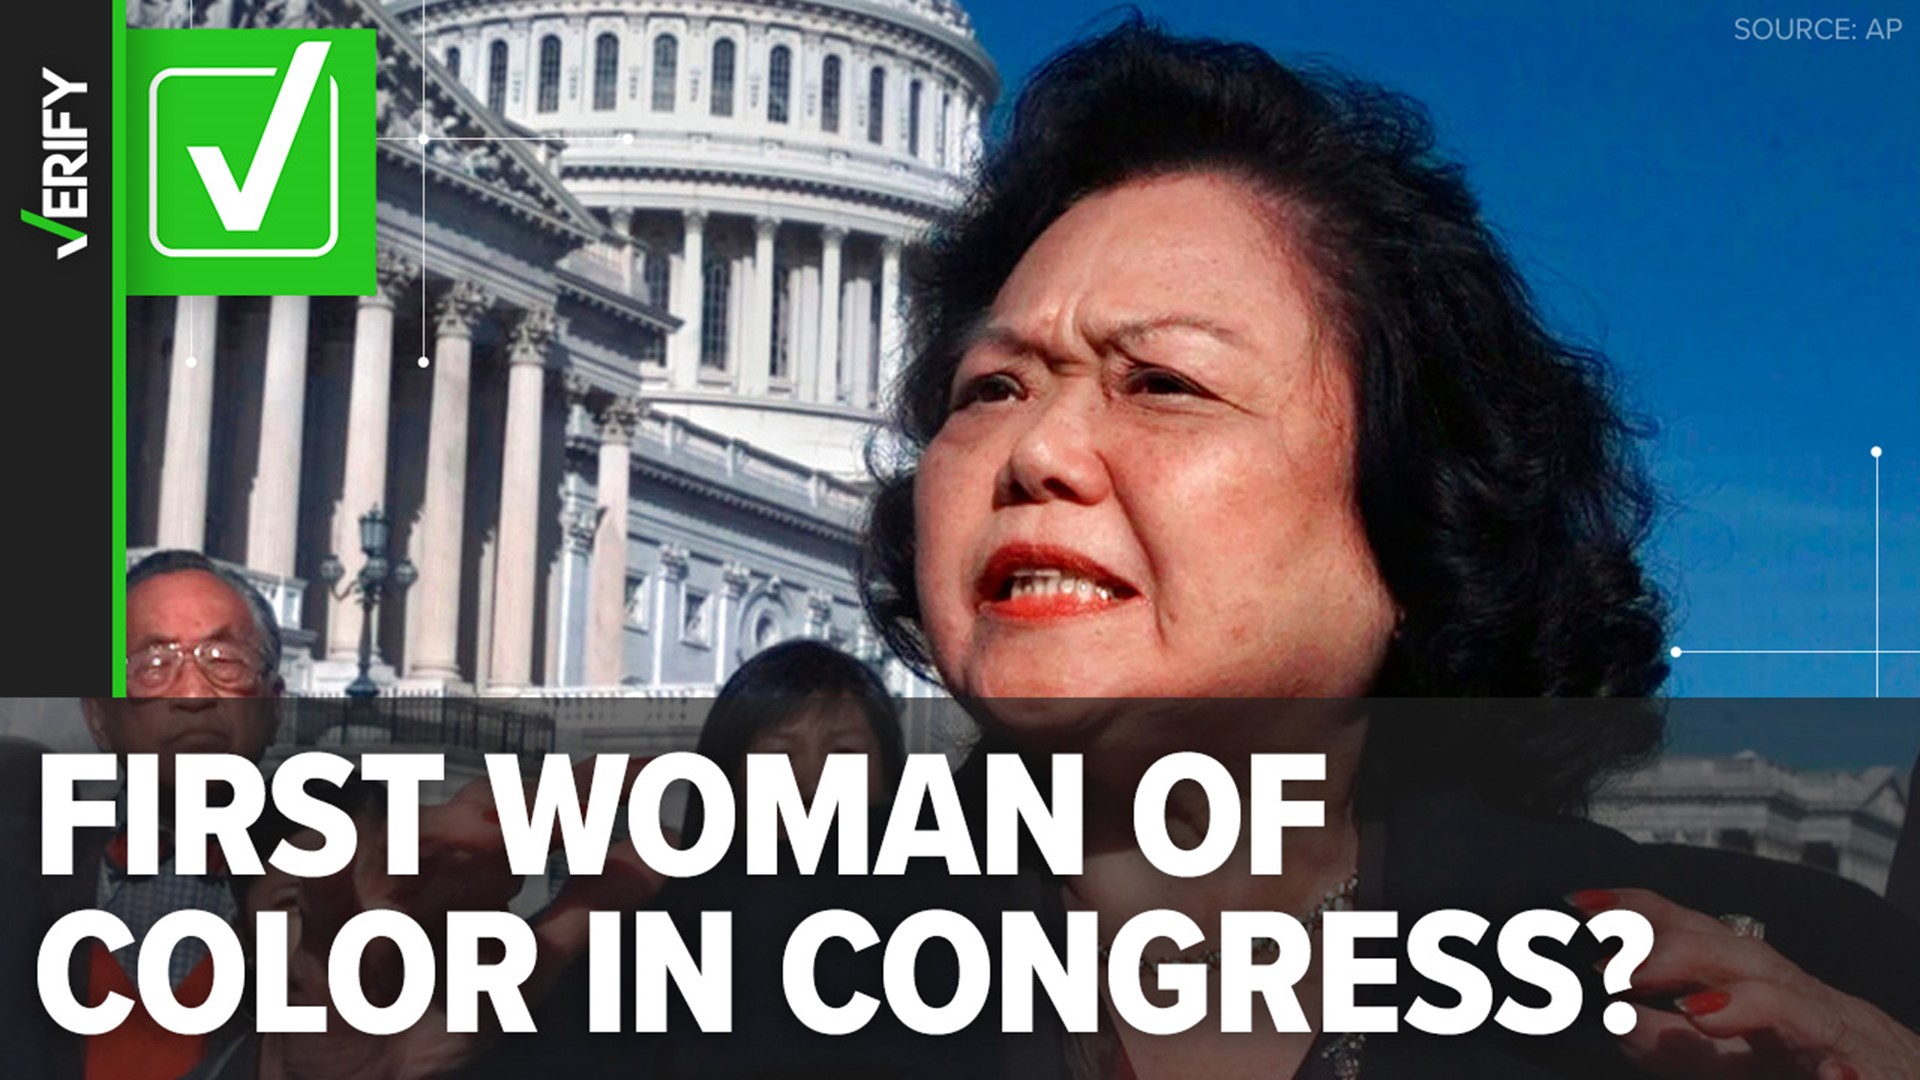 Rep. Patsy Mink is often remembered as an advocate for women’s rights, co-authoring and sponsoring the landmark Title IX law.